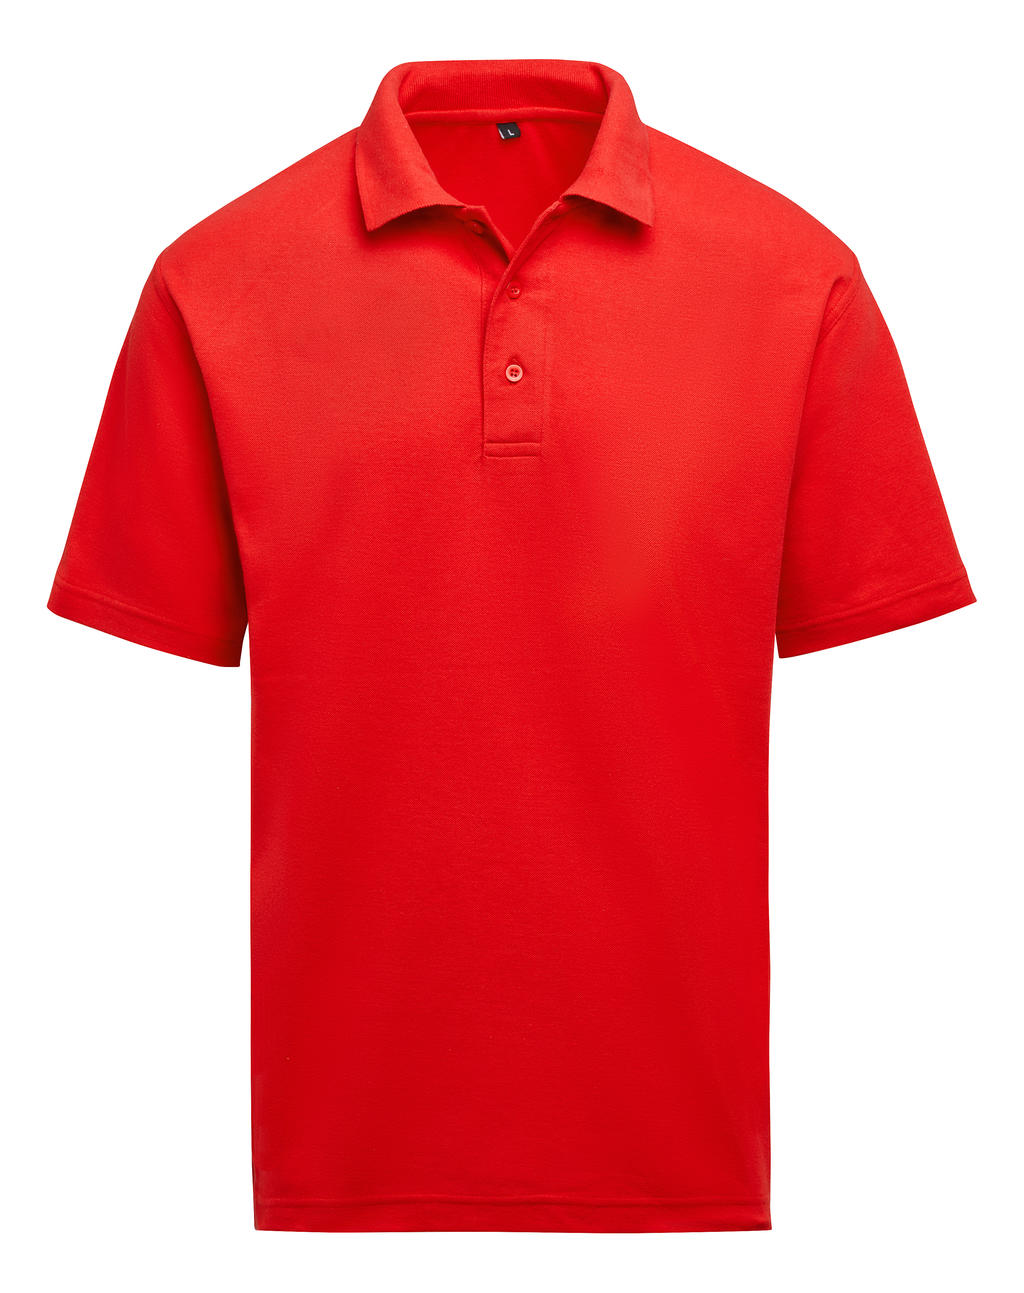  Unisex Polo in Farbe Red